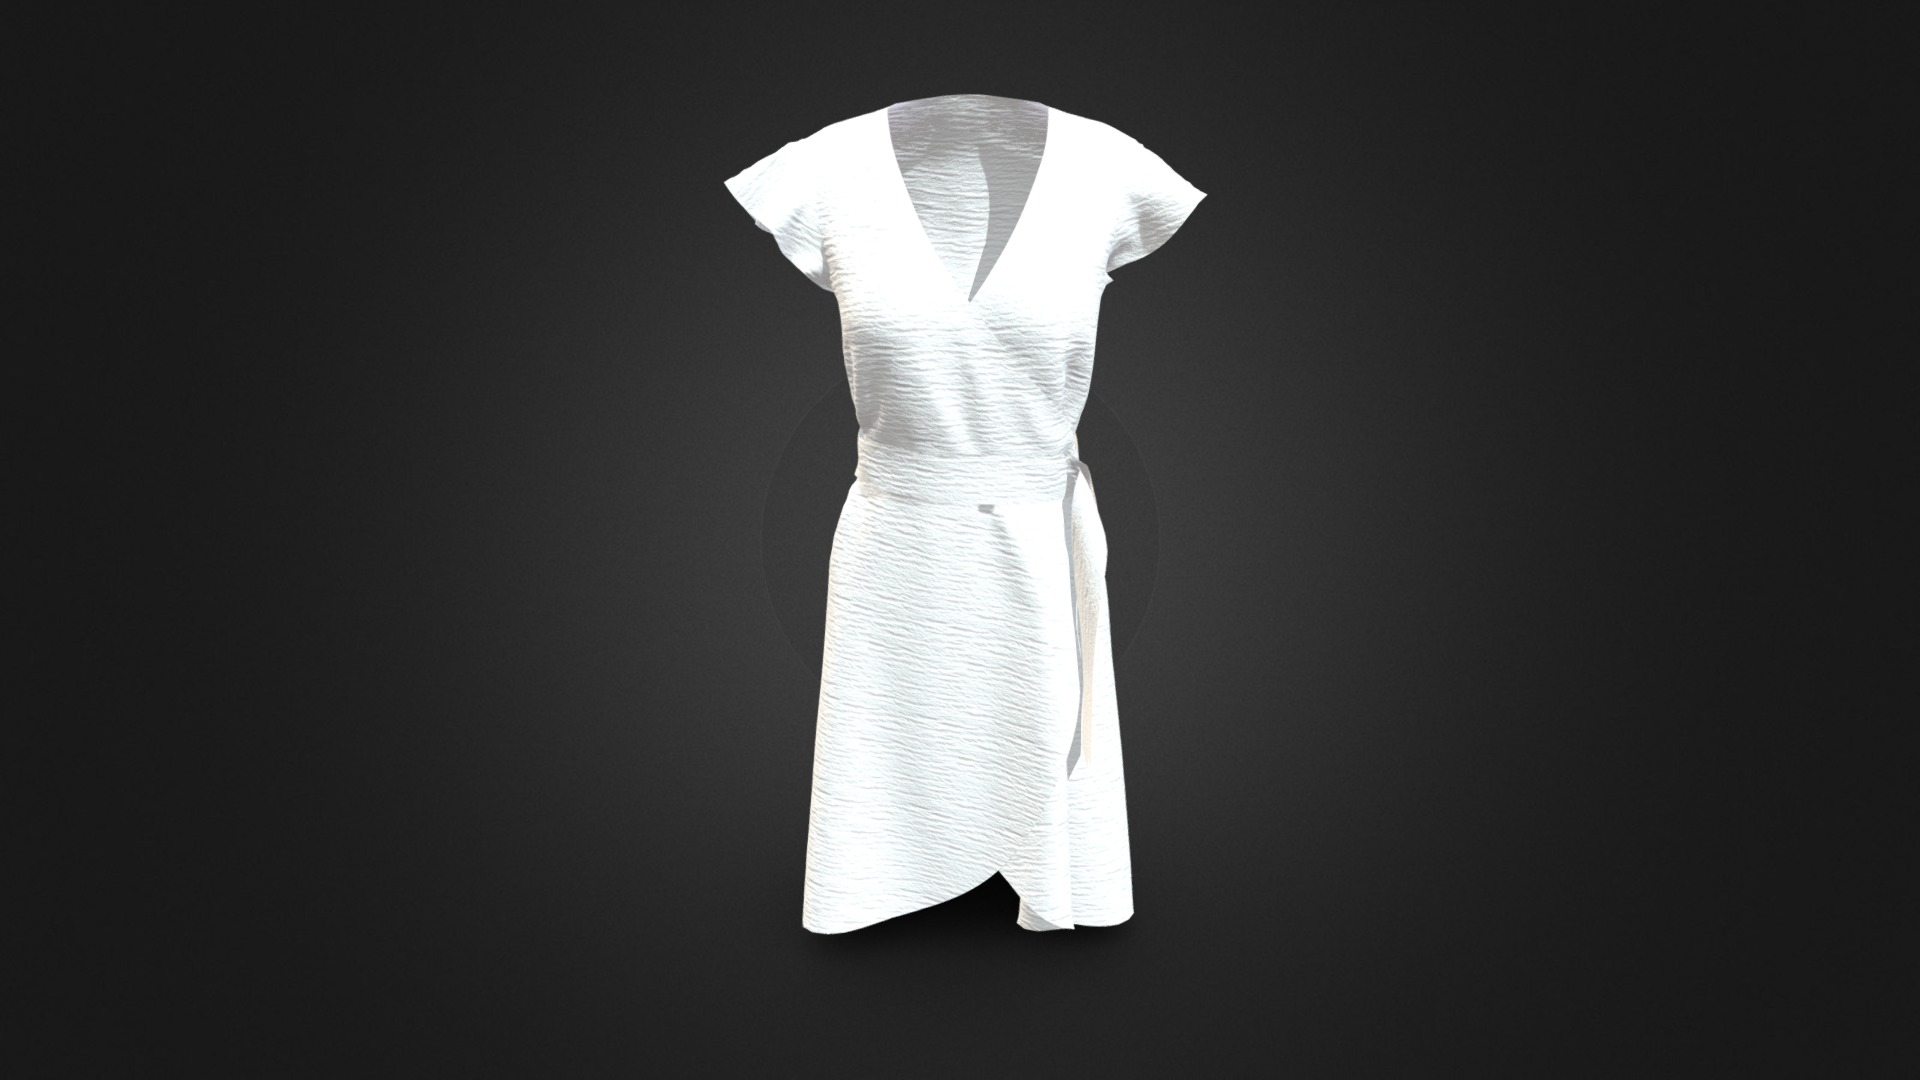 3D model Ruffle Sleeve One Piece - This is a 3D model of the Ruffle Sleeve One Piece. The 3D model is about a white dress with a black background.